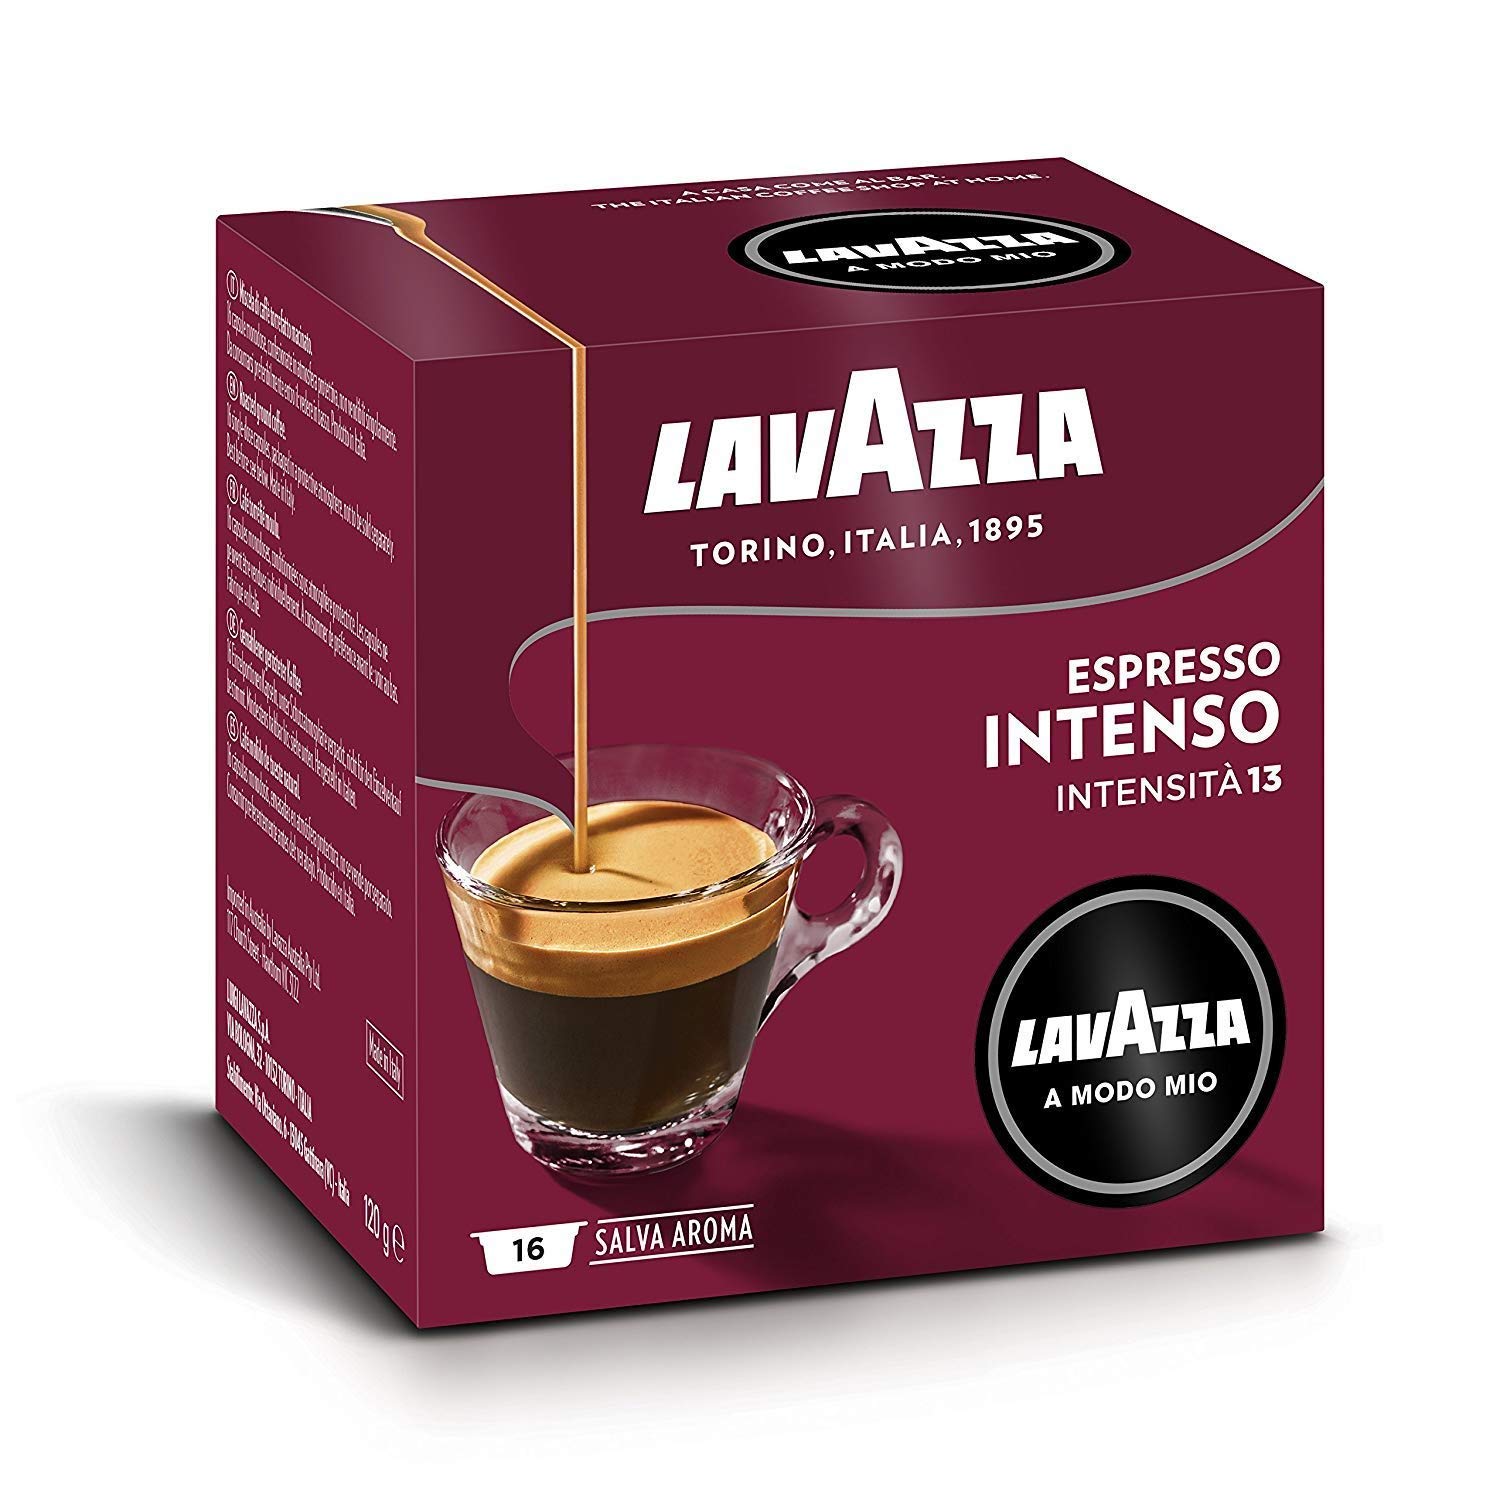 Lavazza A Modo Mio Espresso Intenso, 256 coffee capsules, for an espresso with notes of cocoa and spices, Arabica and Robusta, intensity 13/13, medium roast, 16 packs of 16 capsules